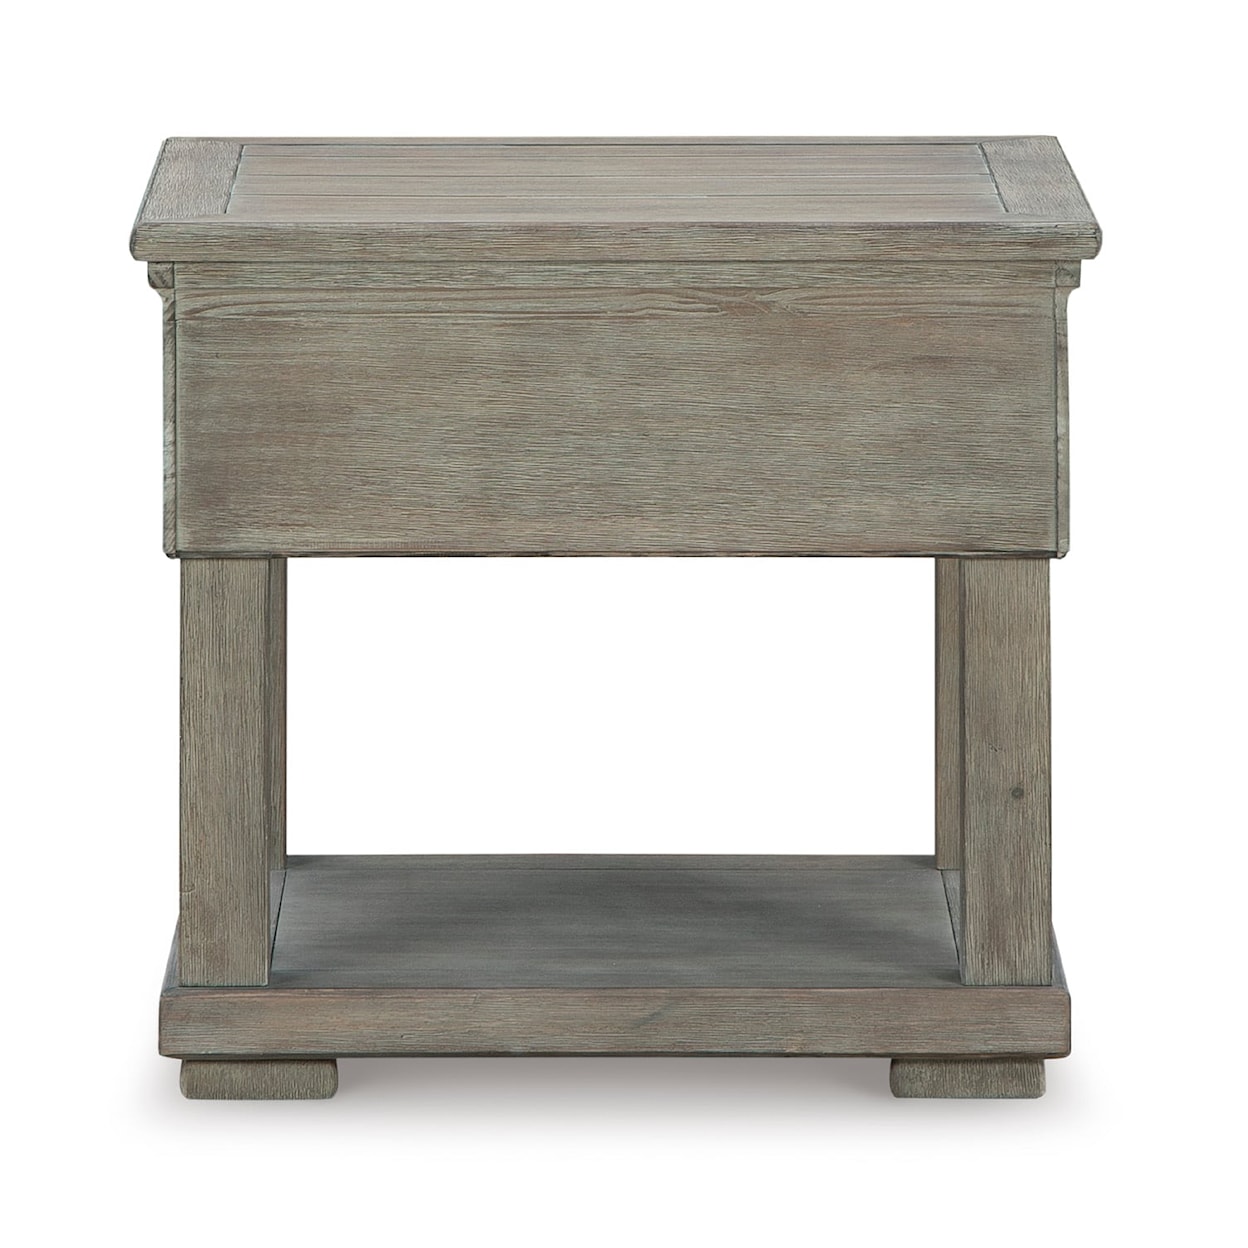 Signature Design by Ashley Moreshire End Table